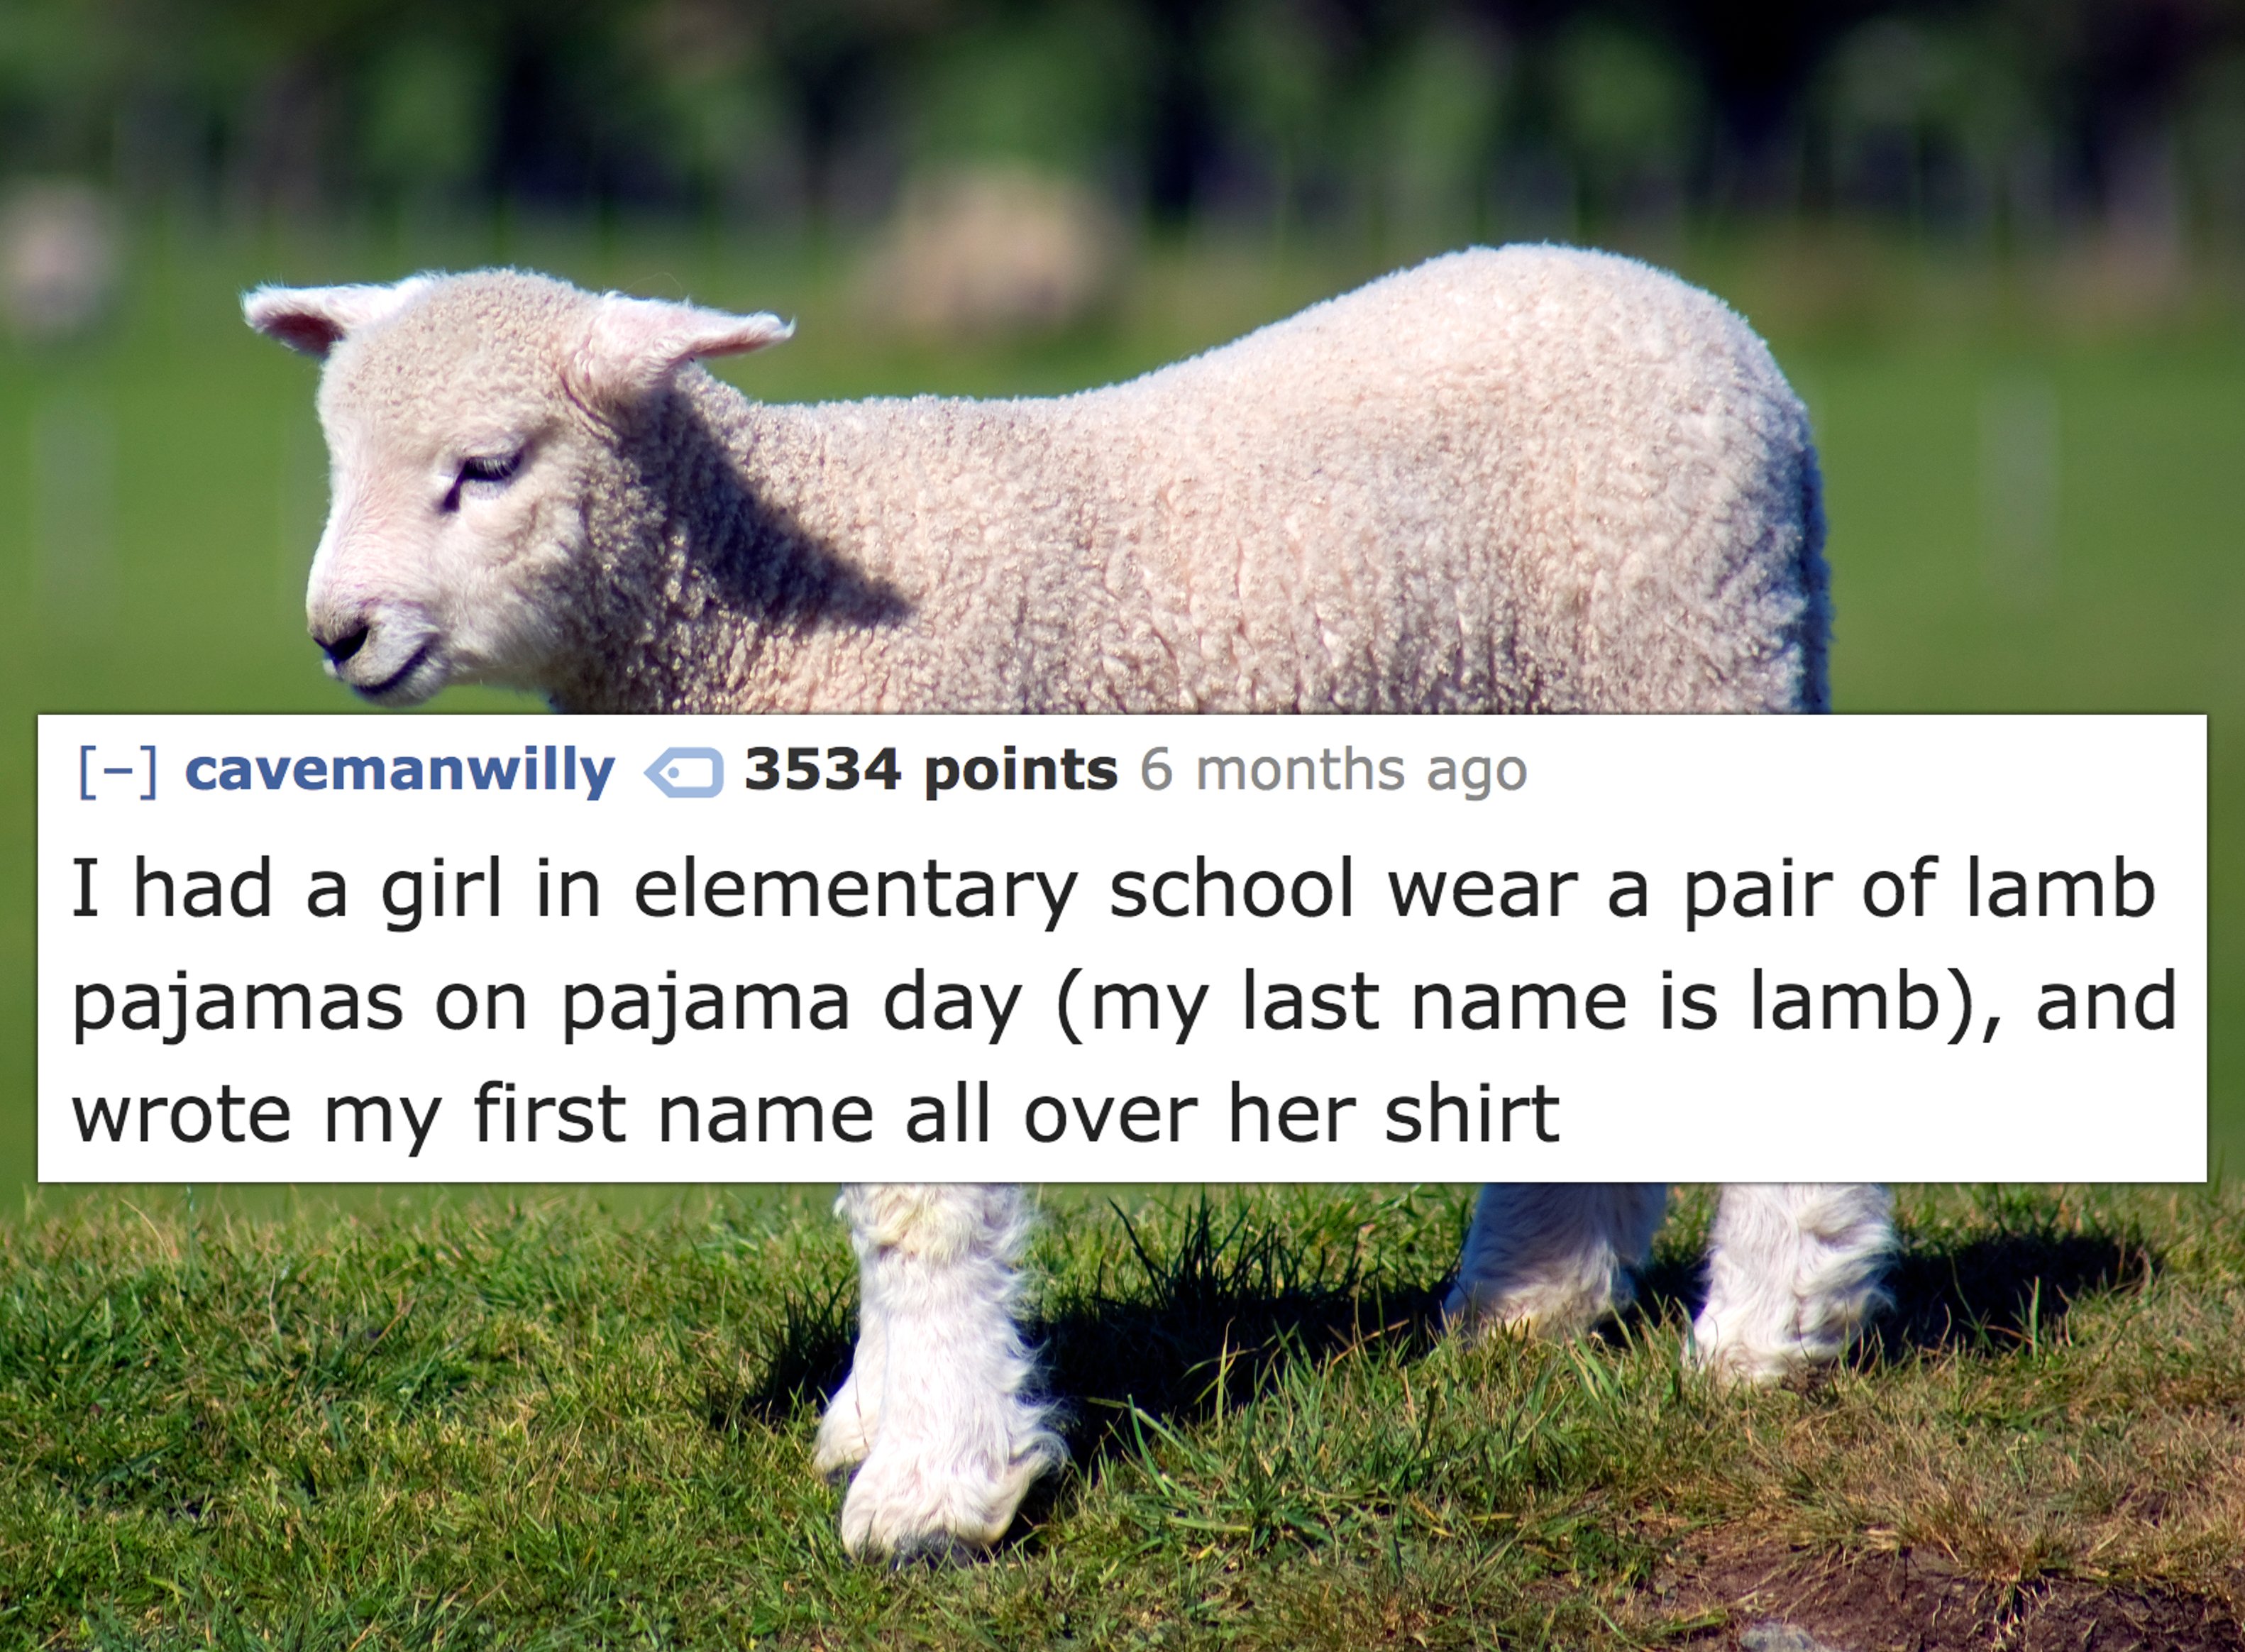 cavemanwilly 3534 points 6 months ago I had a girl in elementary school wear a pair of lamb pajamas on pajama day my last name is lamb, and wrote my first name all over her shirt